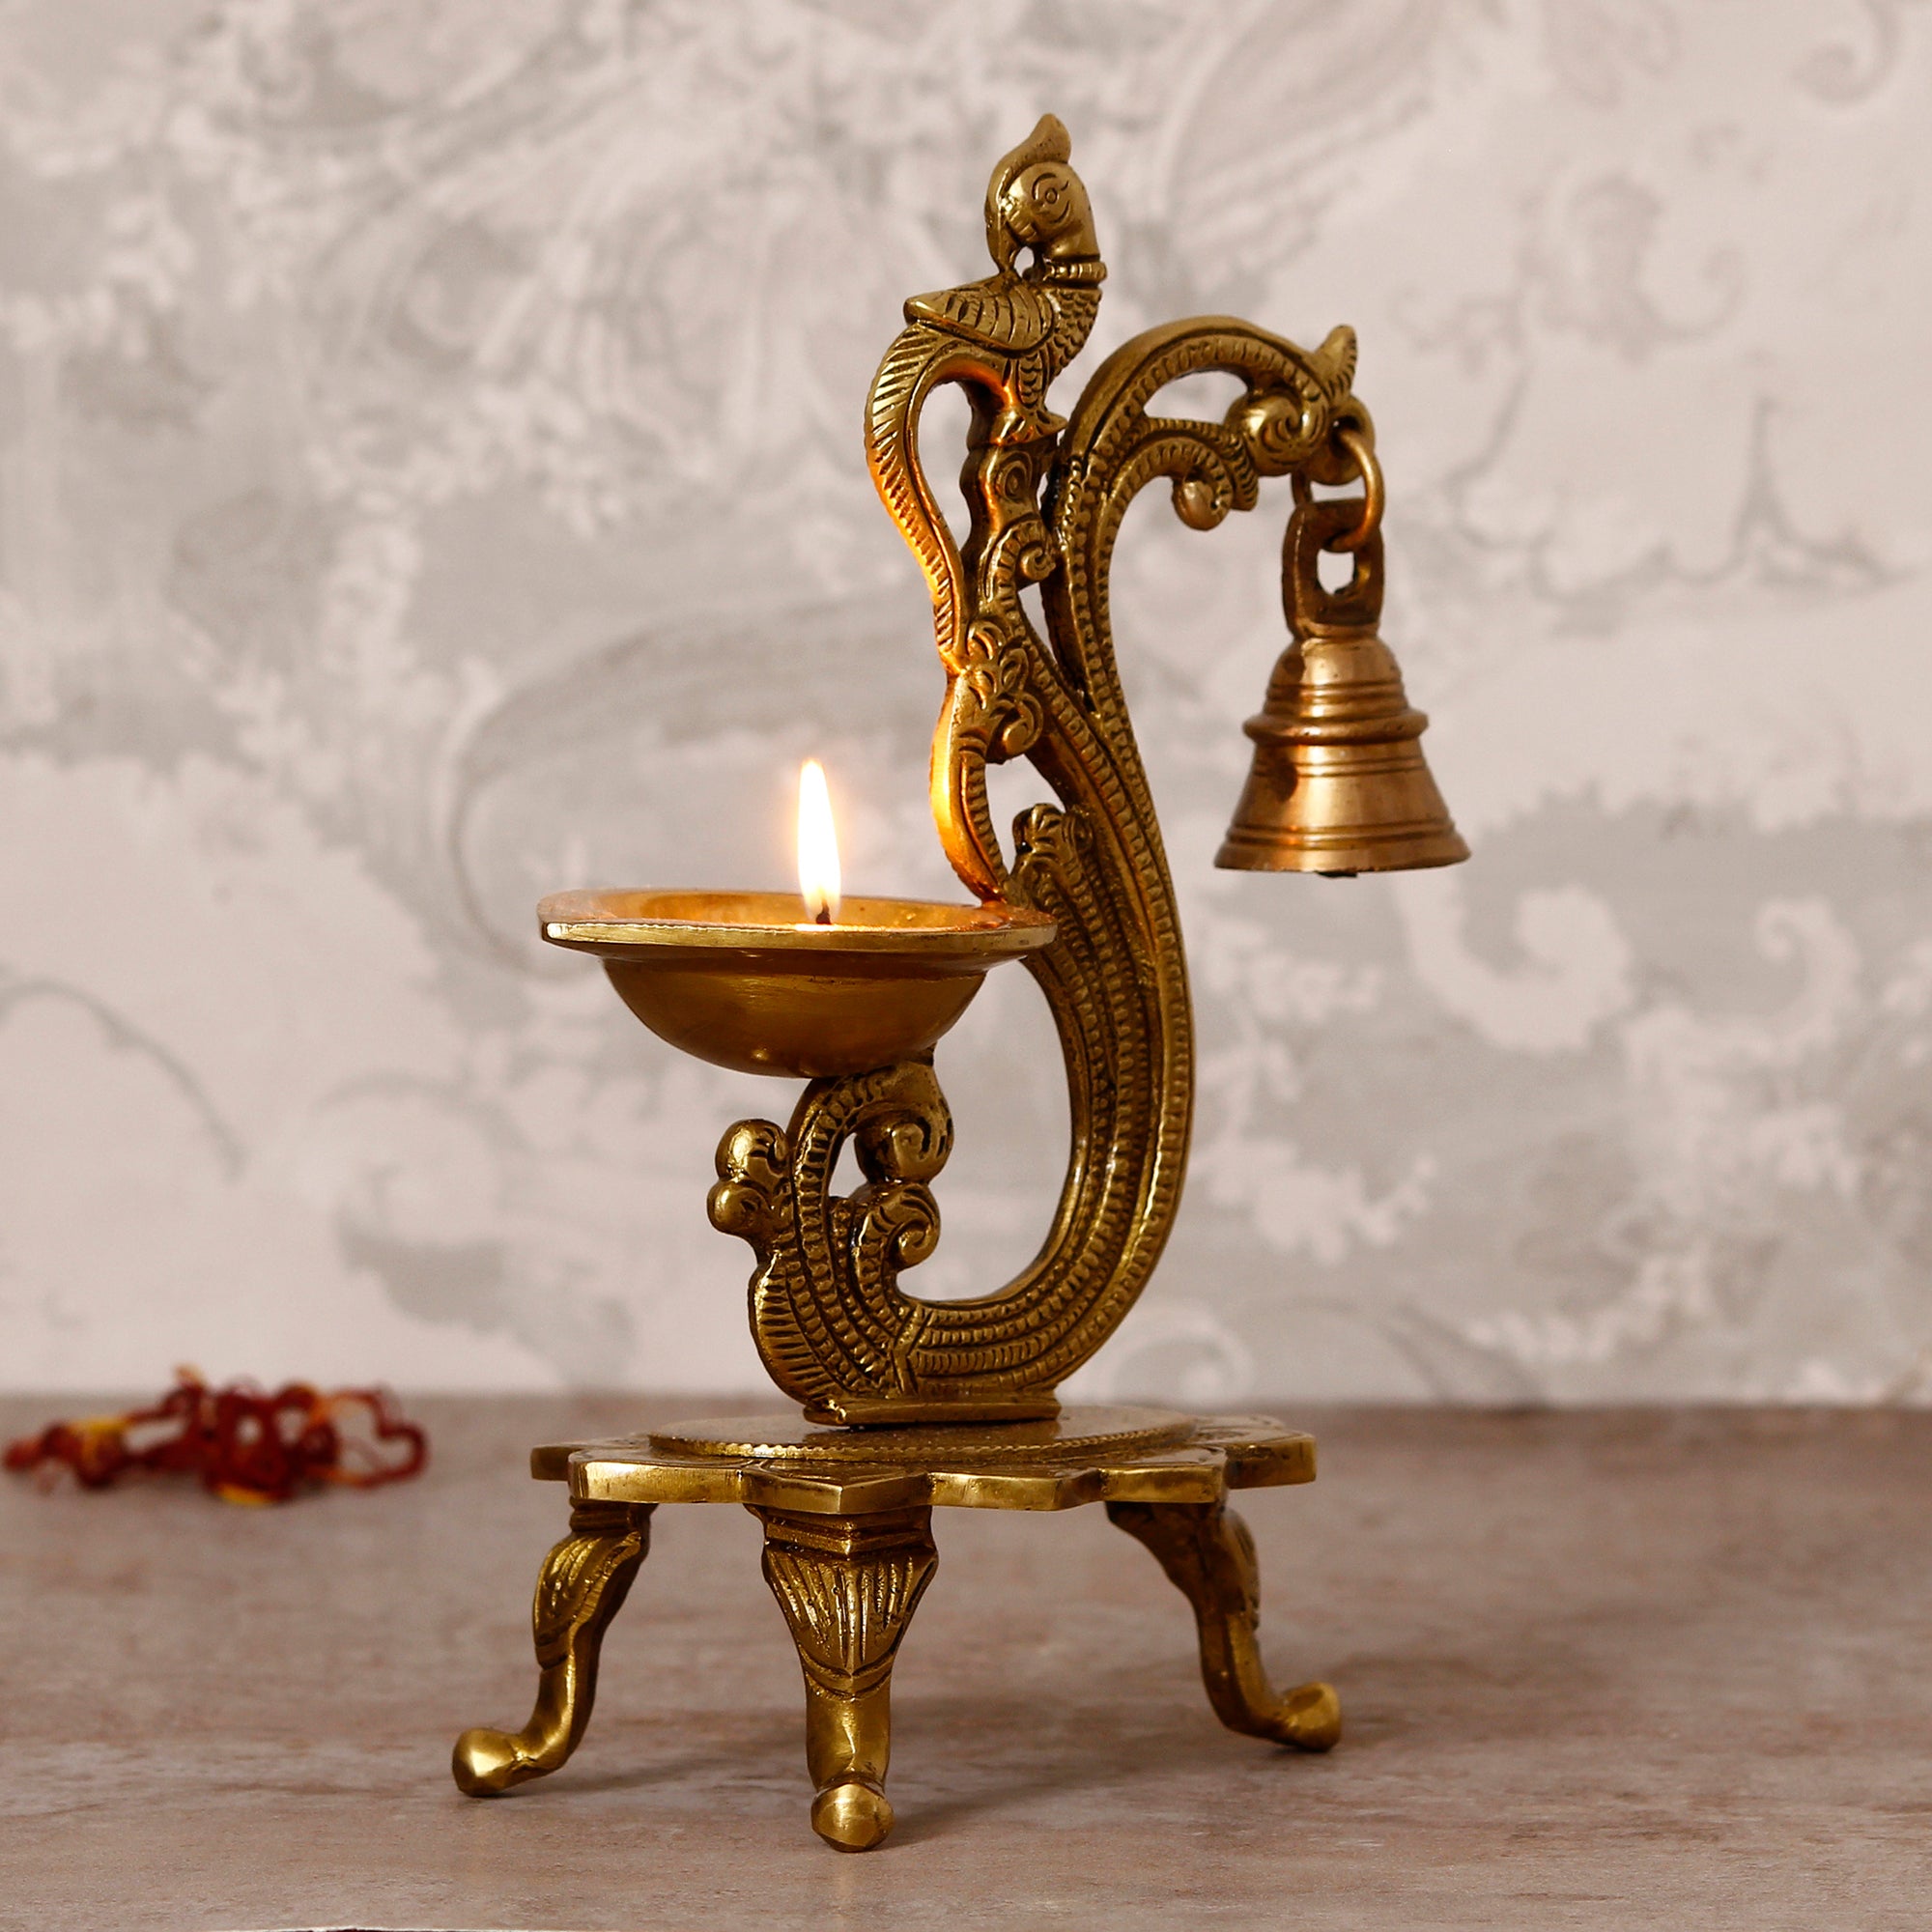 Golden Antique Finish Decorative Handcrafted Parrot Showpiece Brass Diya with Bells and Stand